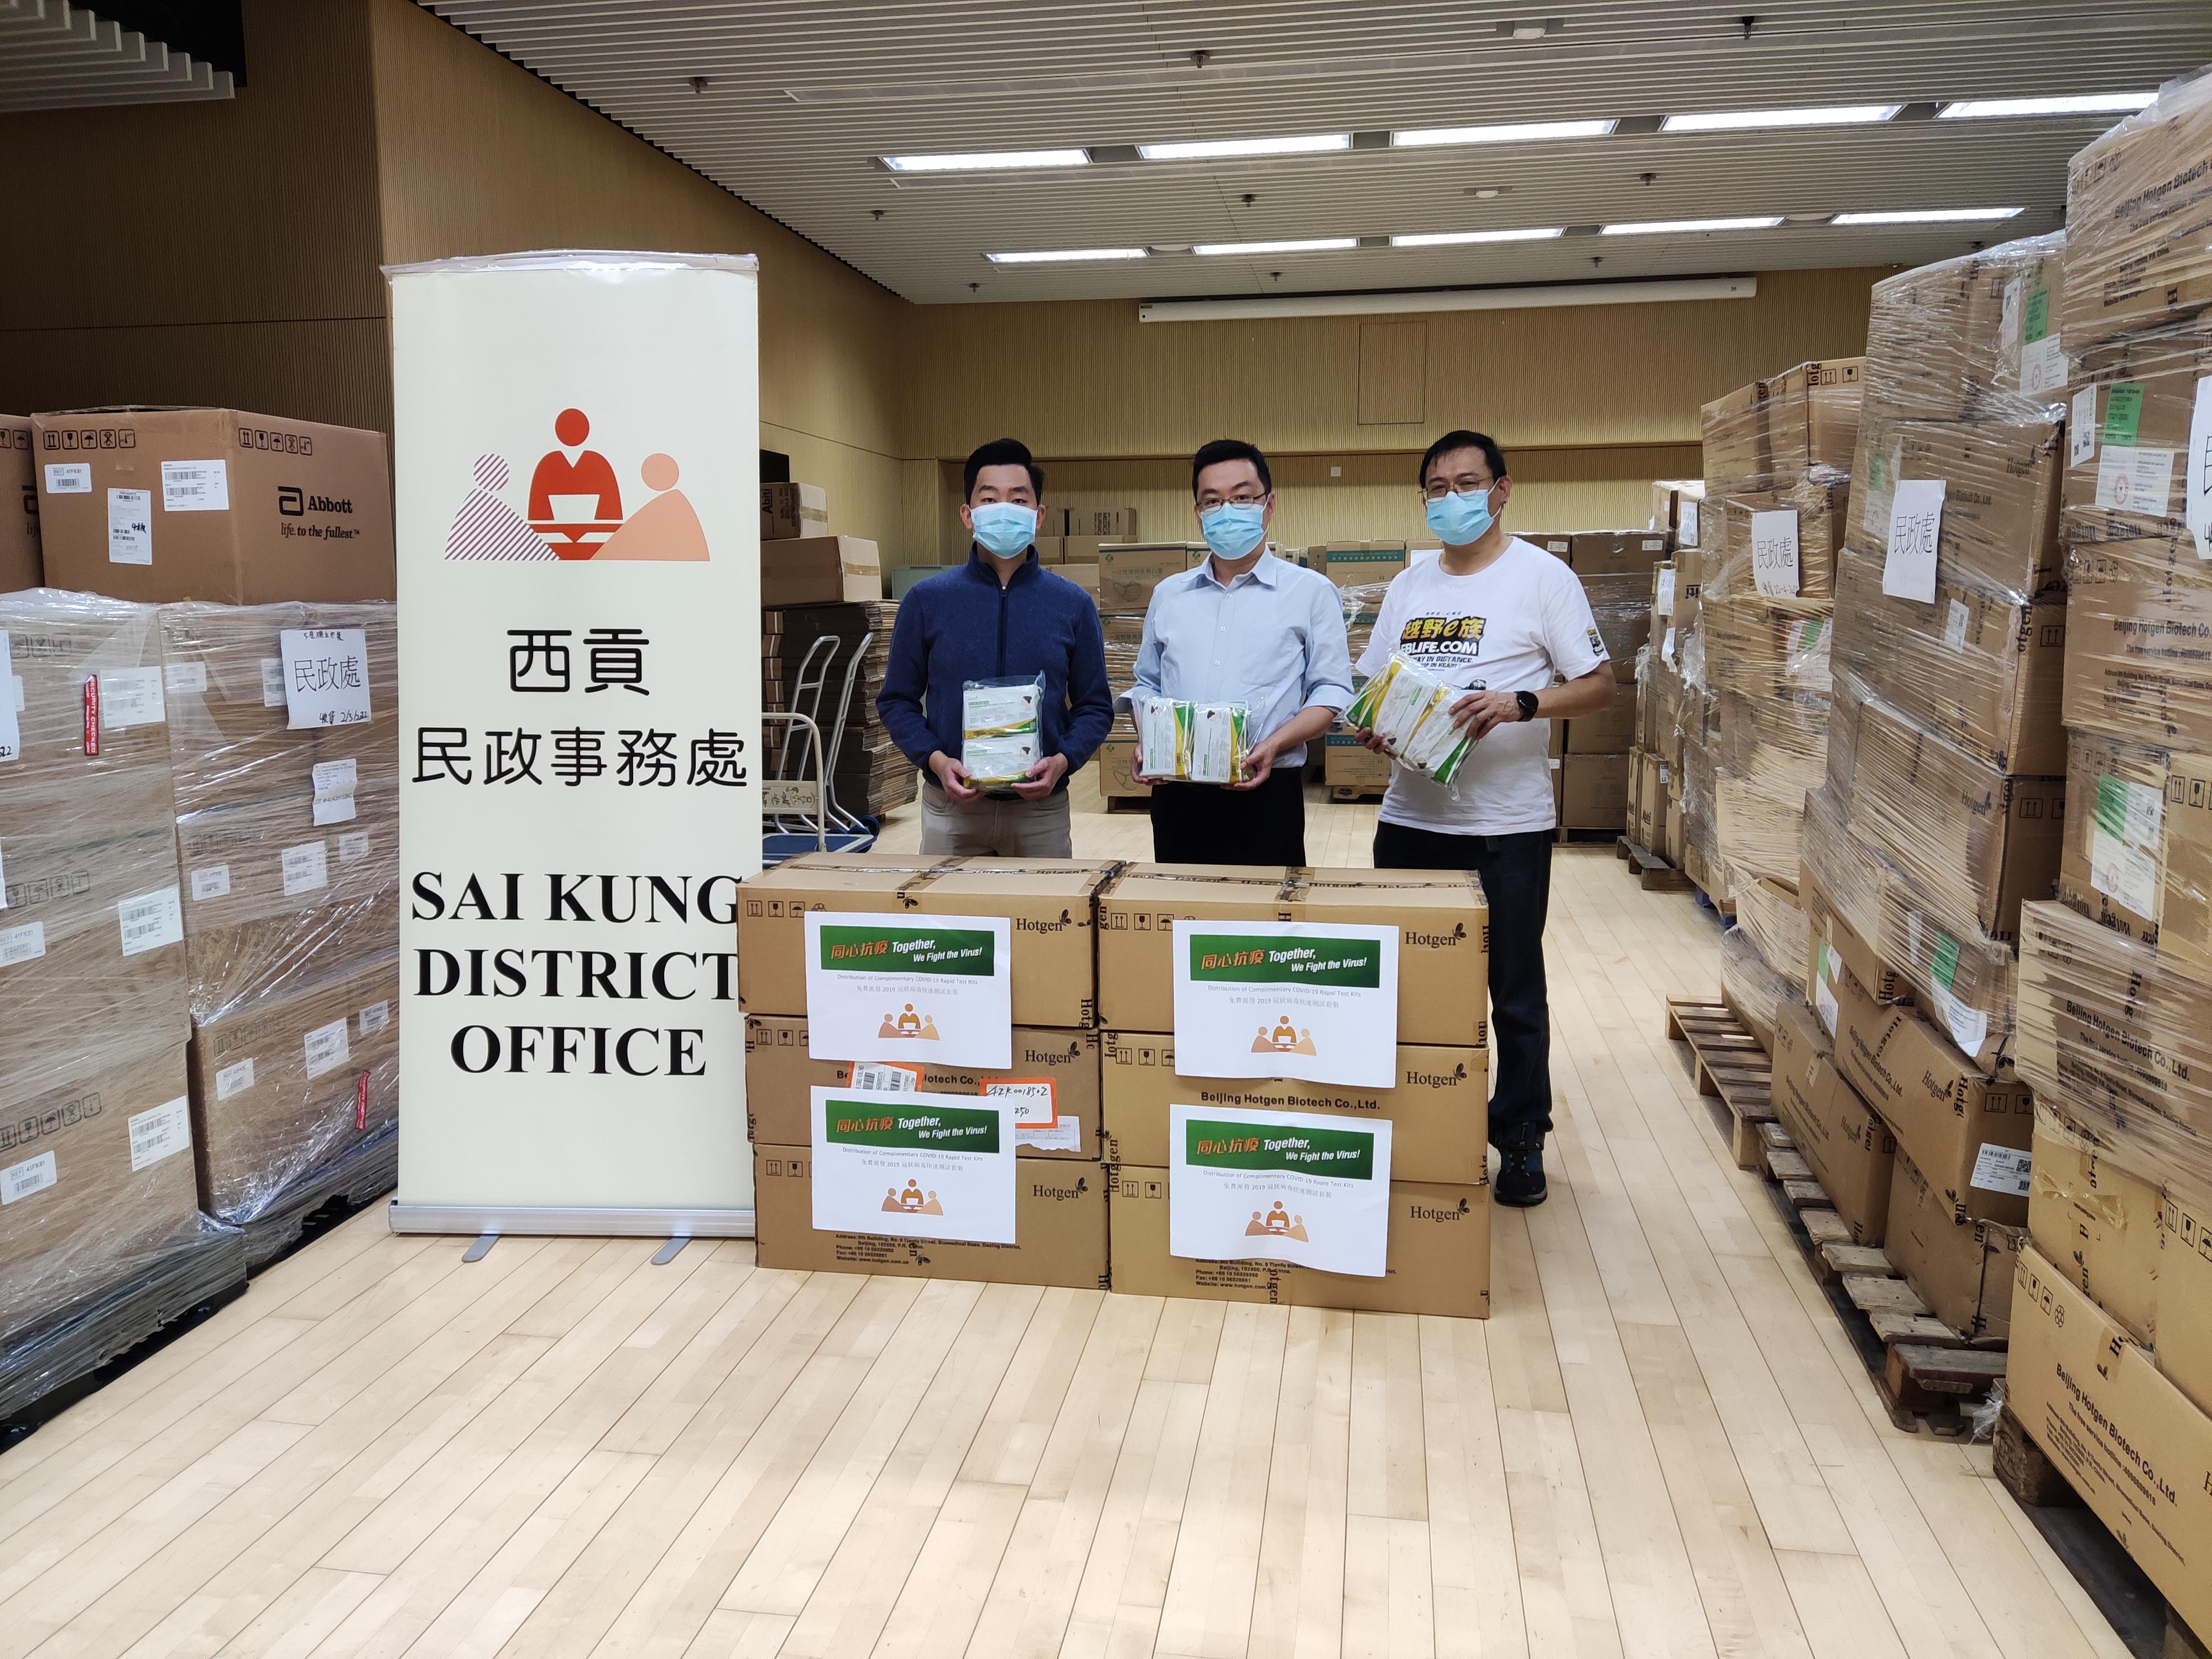 The Sai Kung District Office today (April 26) distributed COVID-19 rapid test kits to households, cleansing workers and property management staff living and working in East Point City for voluntary testing through the property management company.